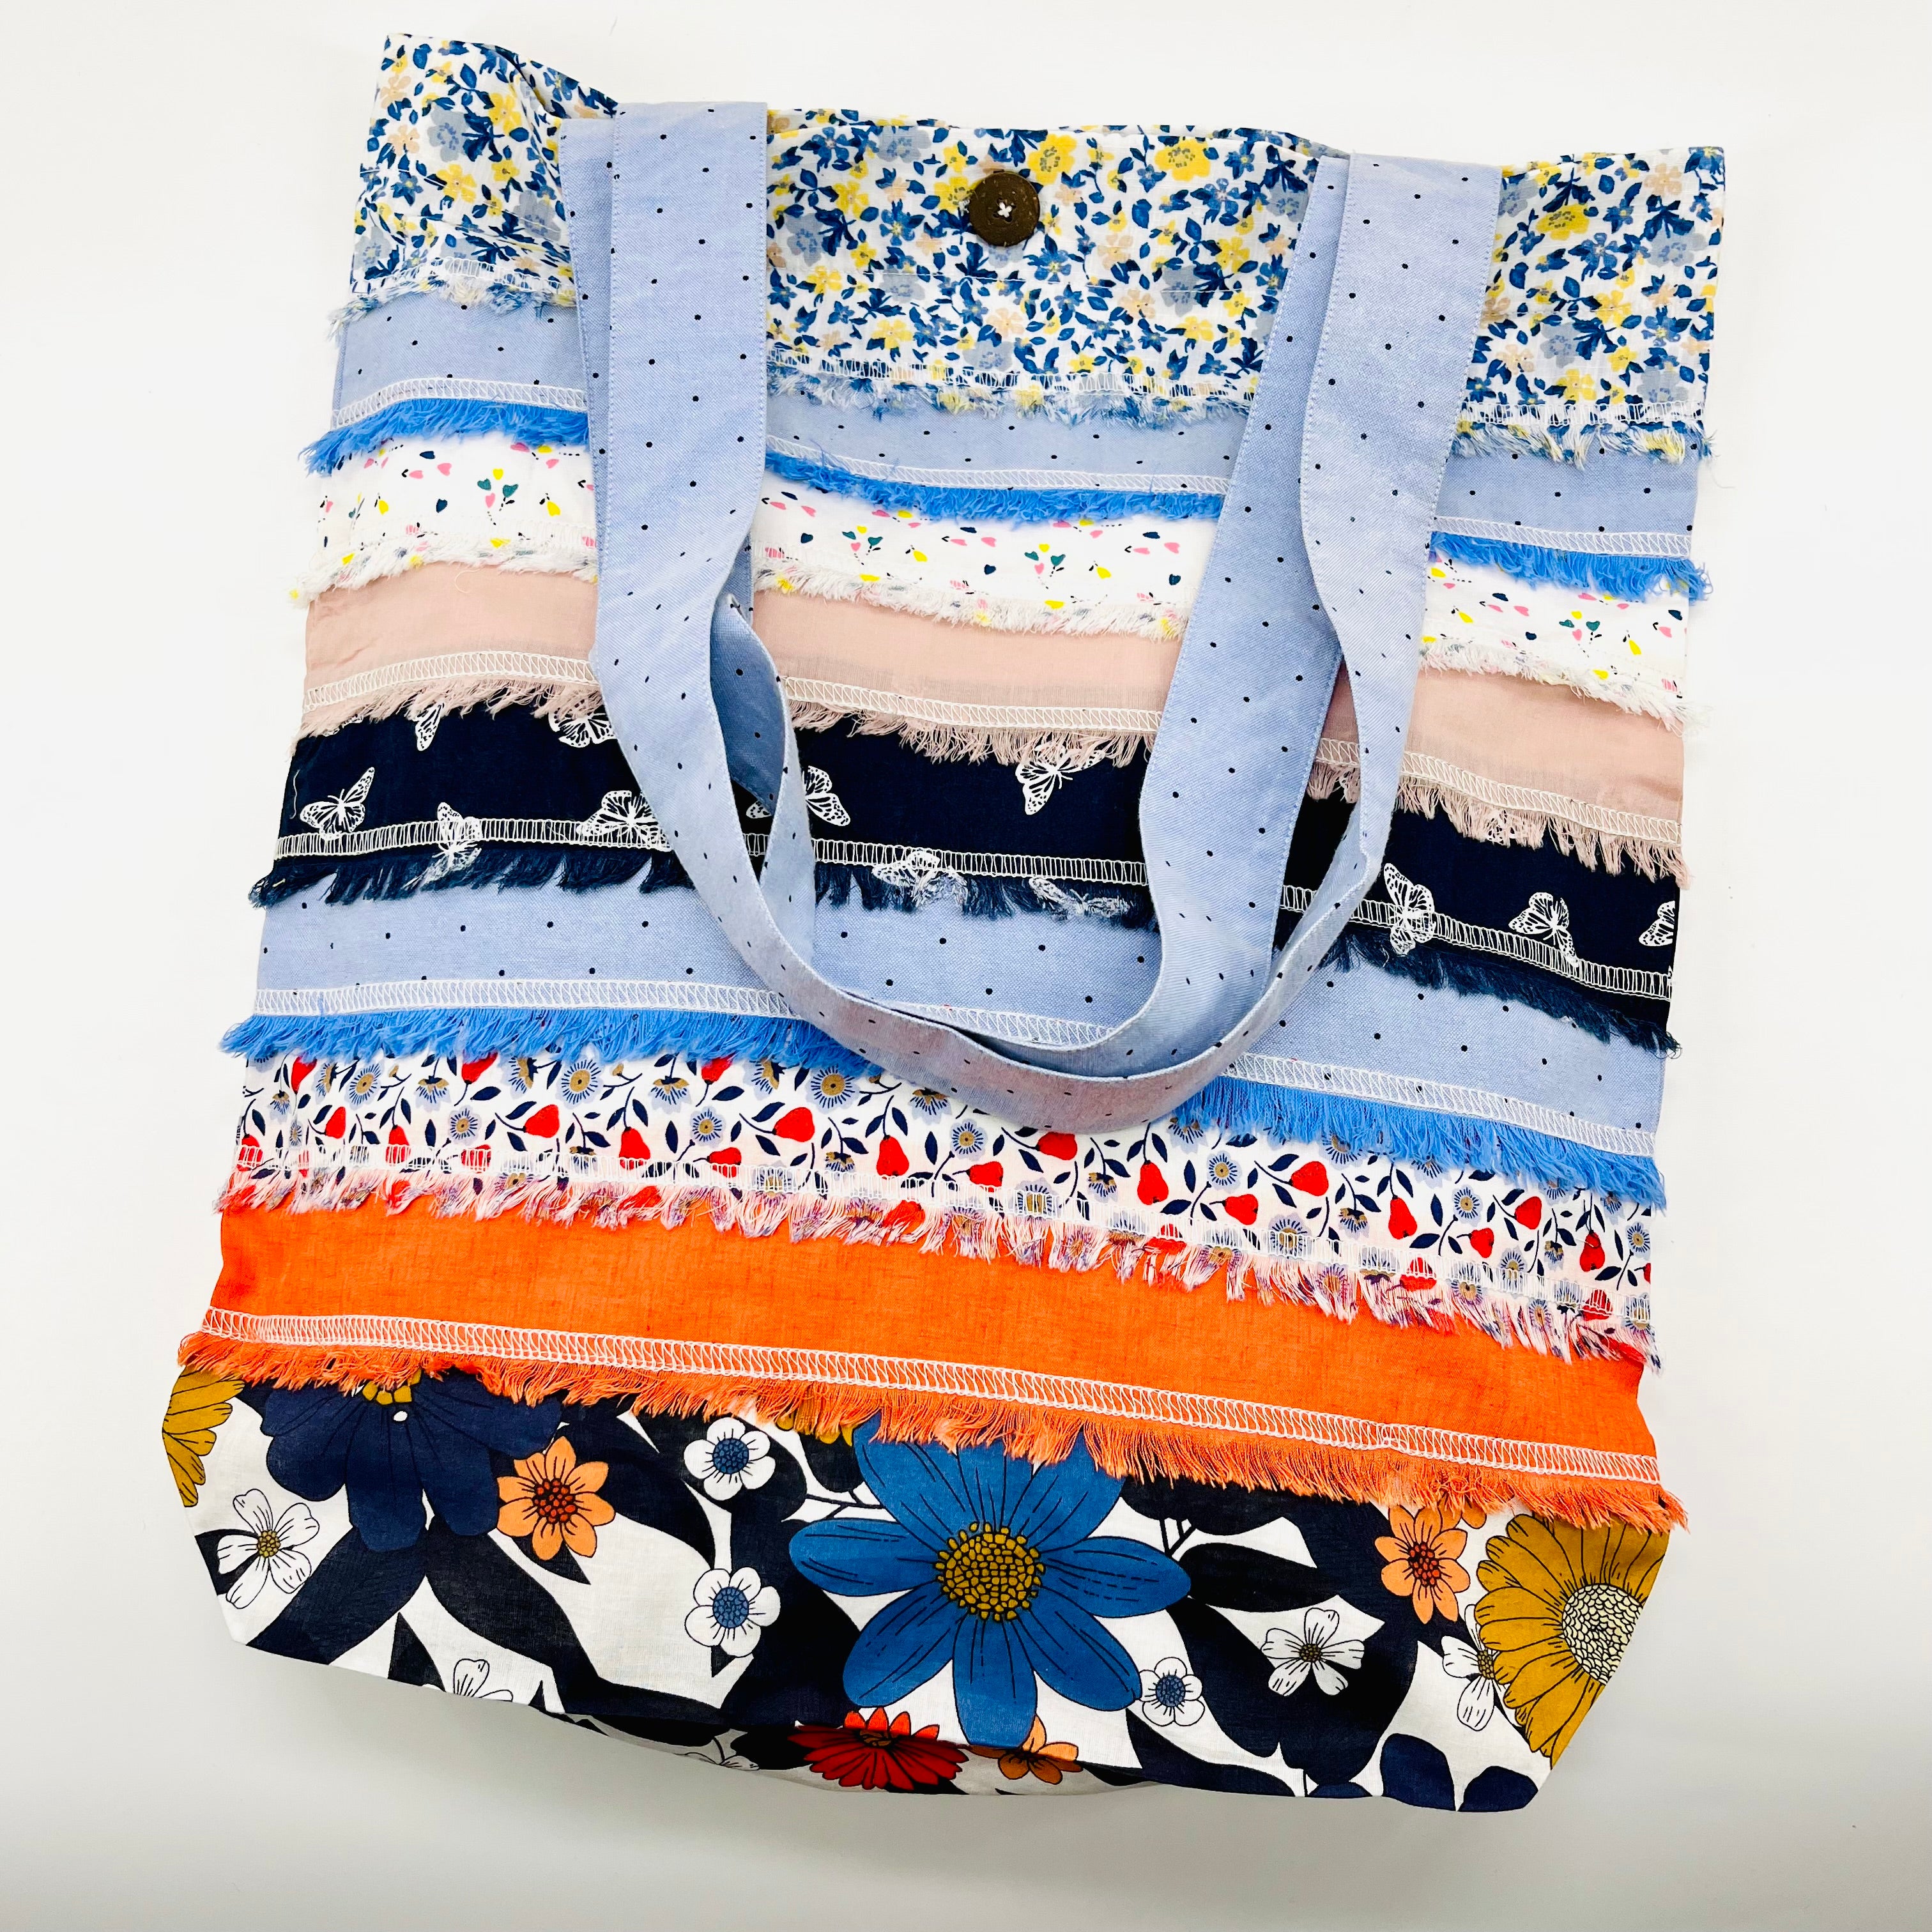 Upcycled Patchwork Fabric Reusable Bags